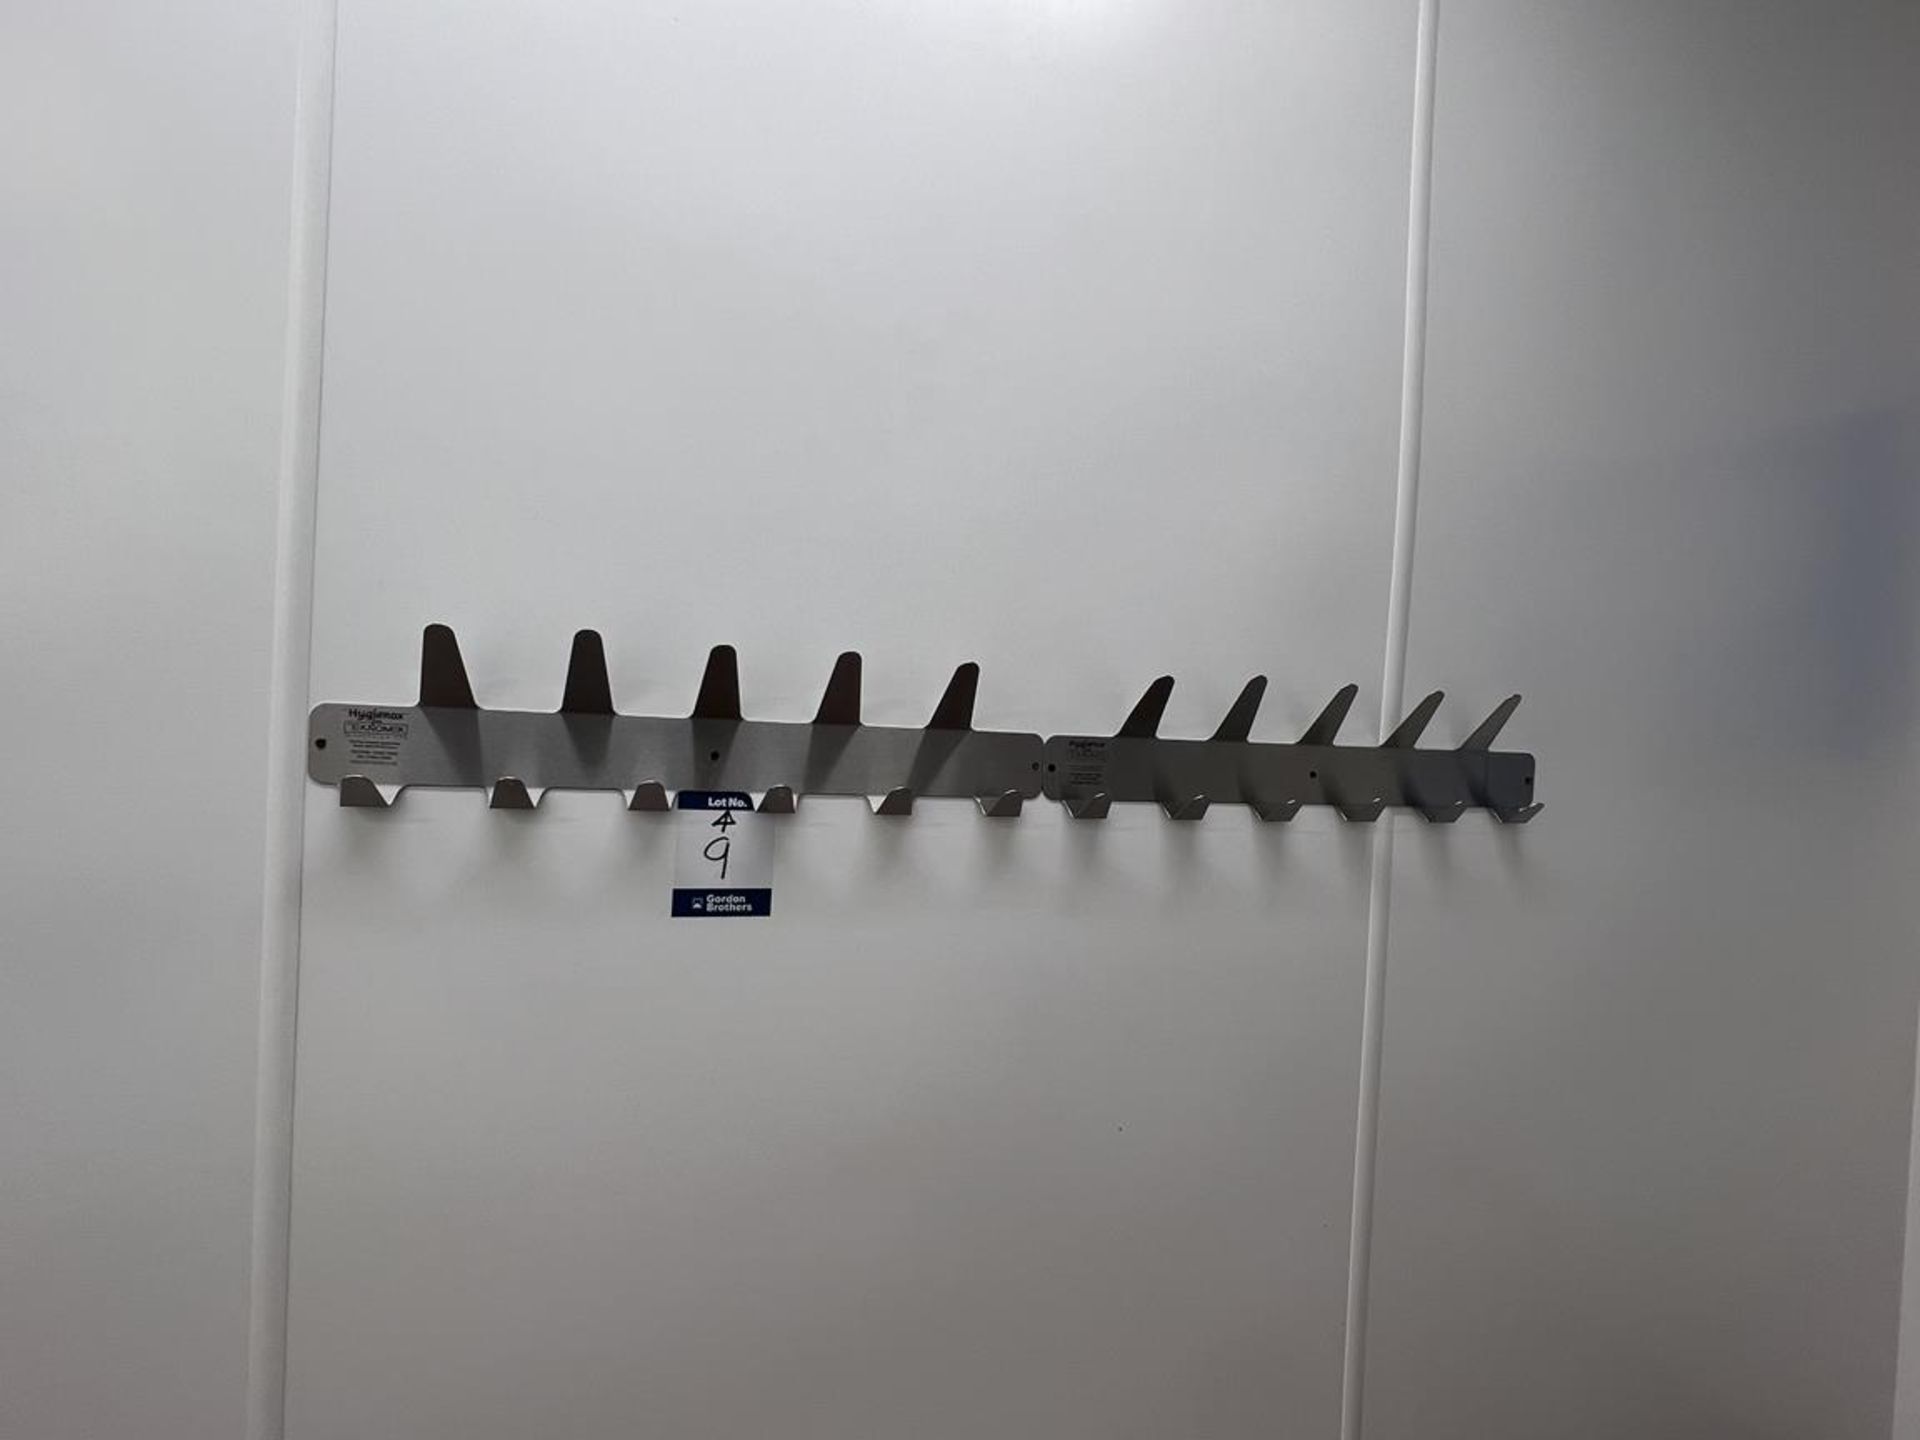 2x (no.) Hygienox, stainless steel wall mounted coat hooks, 1x (no.) 22 hook and 1x (no.) 13 hook - Image 2 of 5